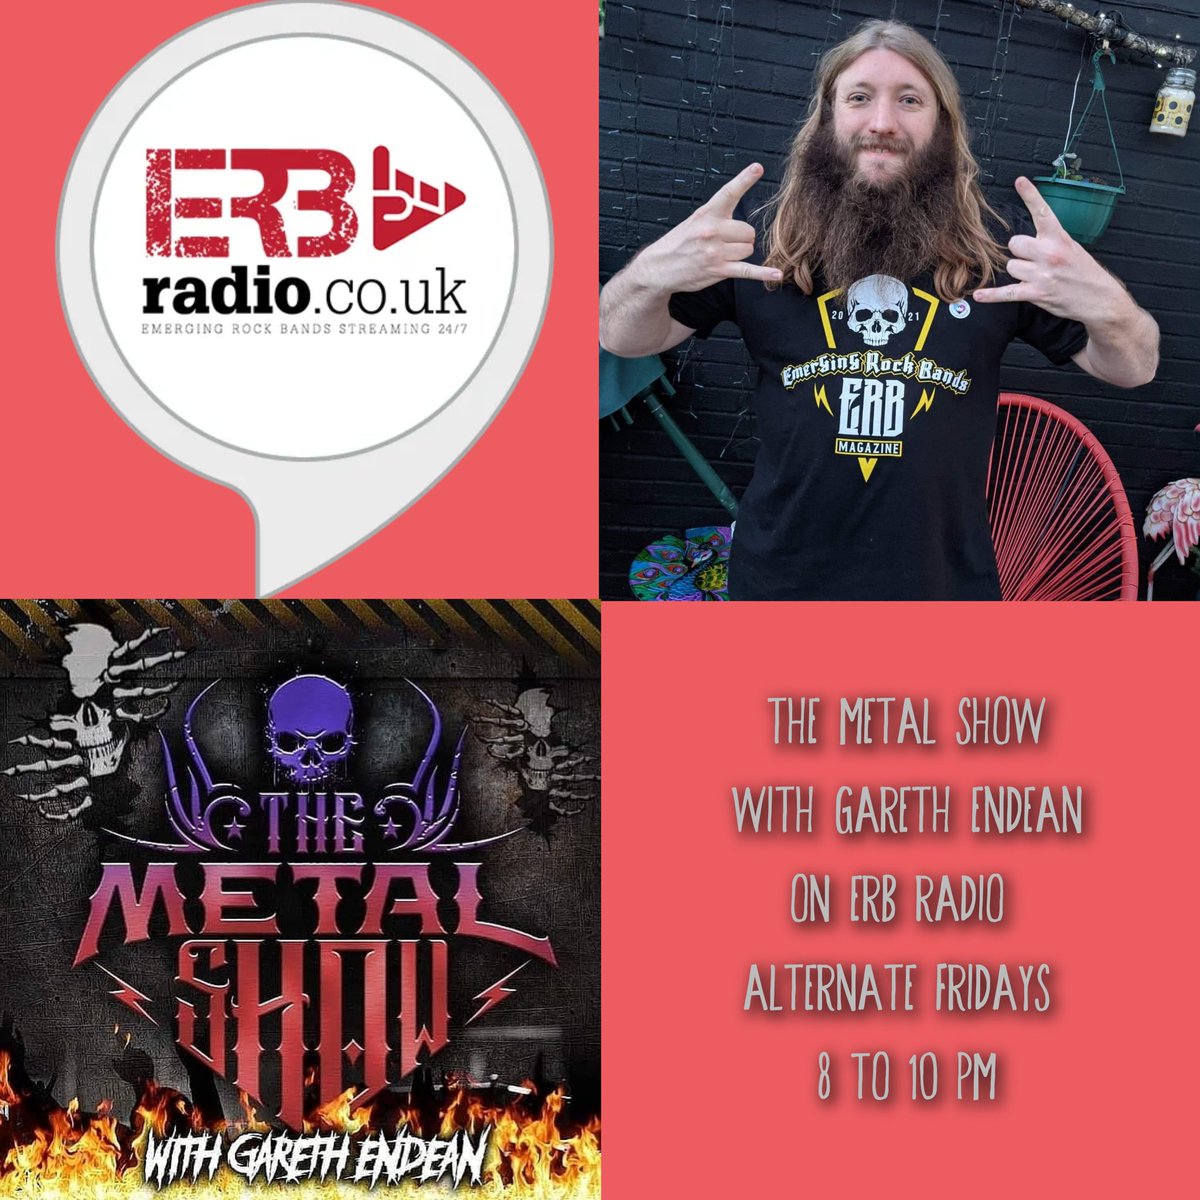 There's 2 glorious hours of #TheMetalShow from 8PM on @EmergingRock Bands Radio! Gareth Endean'll be spinning mighty moshers from @KoreMachina @SeeingThingsCZ @orbitculture @ITHACABAND @TheHXTXD @cagefighthc @BleedingAntlers @WebbOfficialUK @Ritualsukmusic @onemorningleft1...